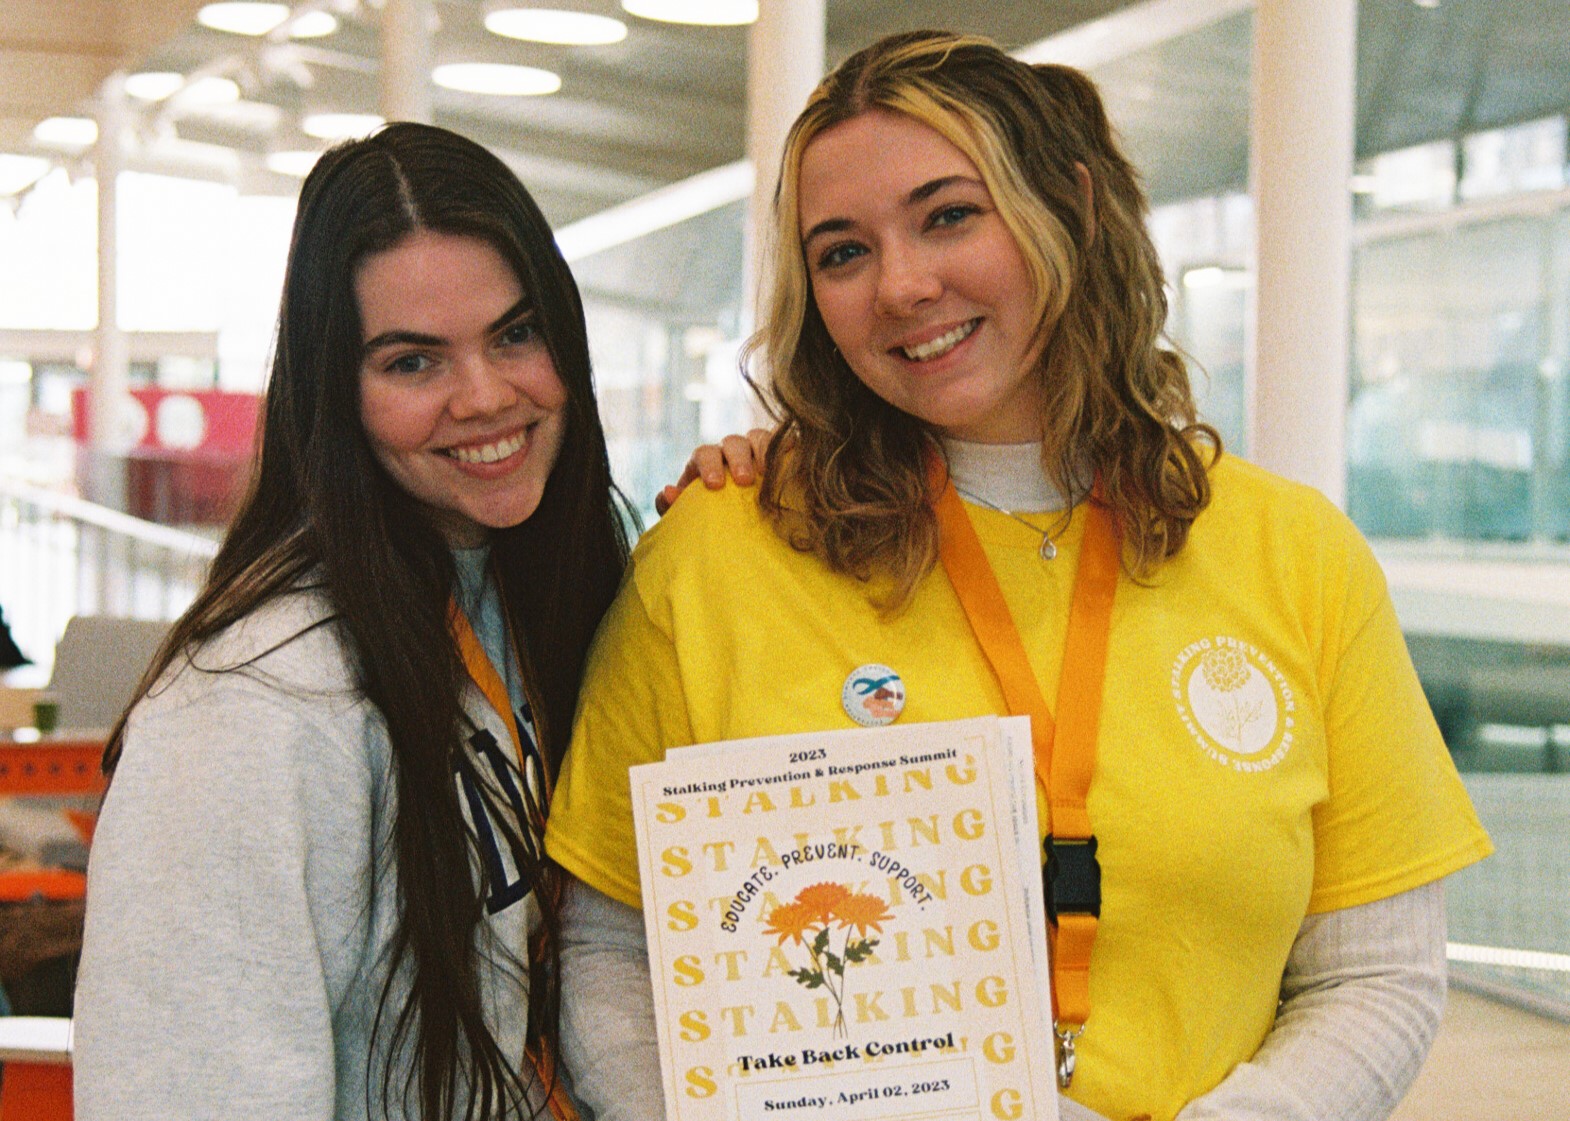 A woman with long brown hair and a gray sweatshirt and woman with wavy blonde hair wearing a yellow shirt smile at the camera.  The blonde woman is displaying a program for the Illinois Stalking Prevention and Response Summit.  